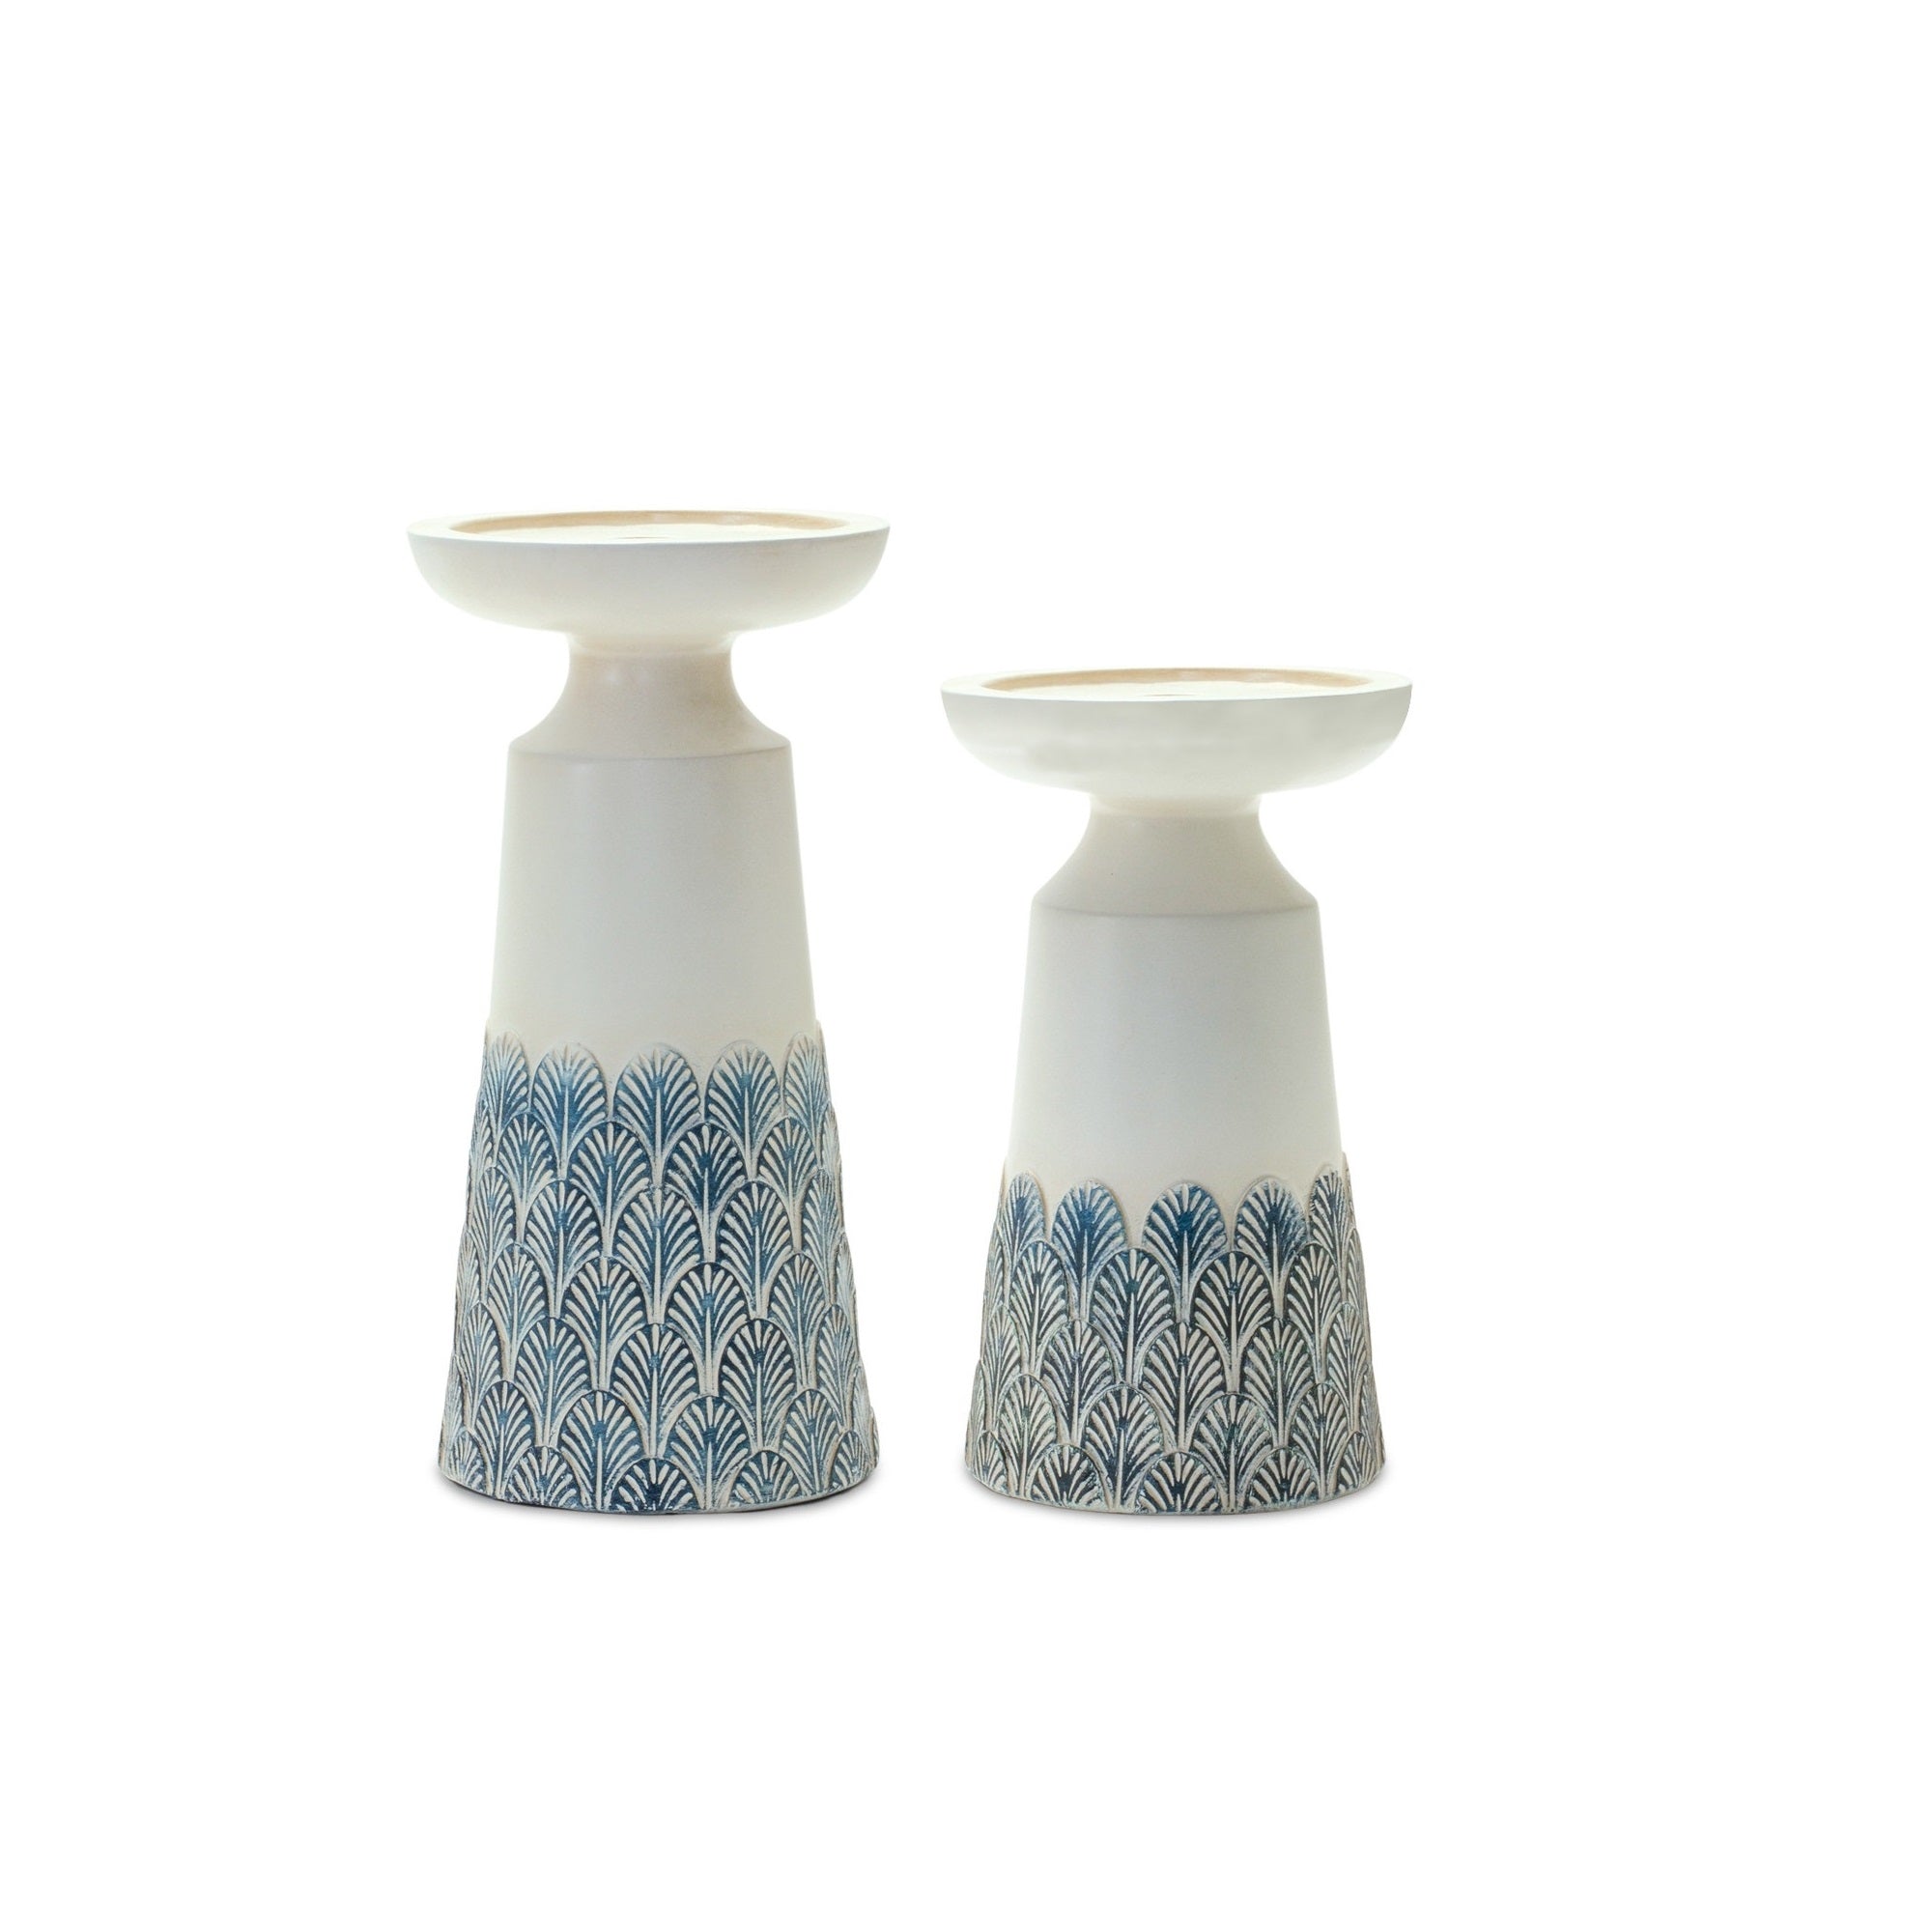 Set of Two White and Blue Tabletop Pillar Candle Holders